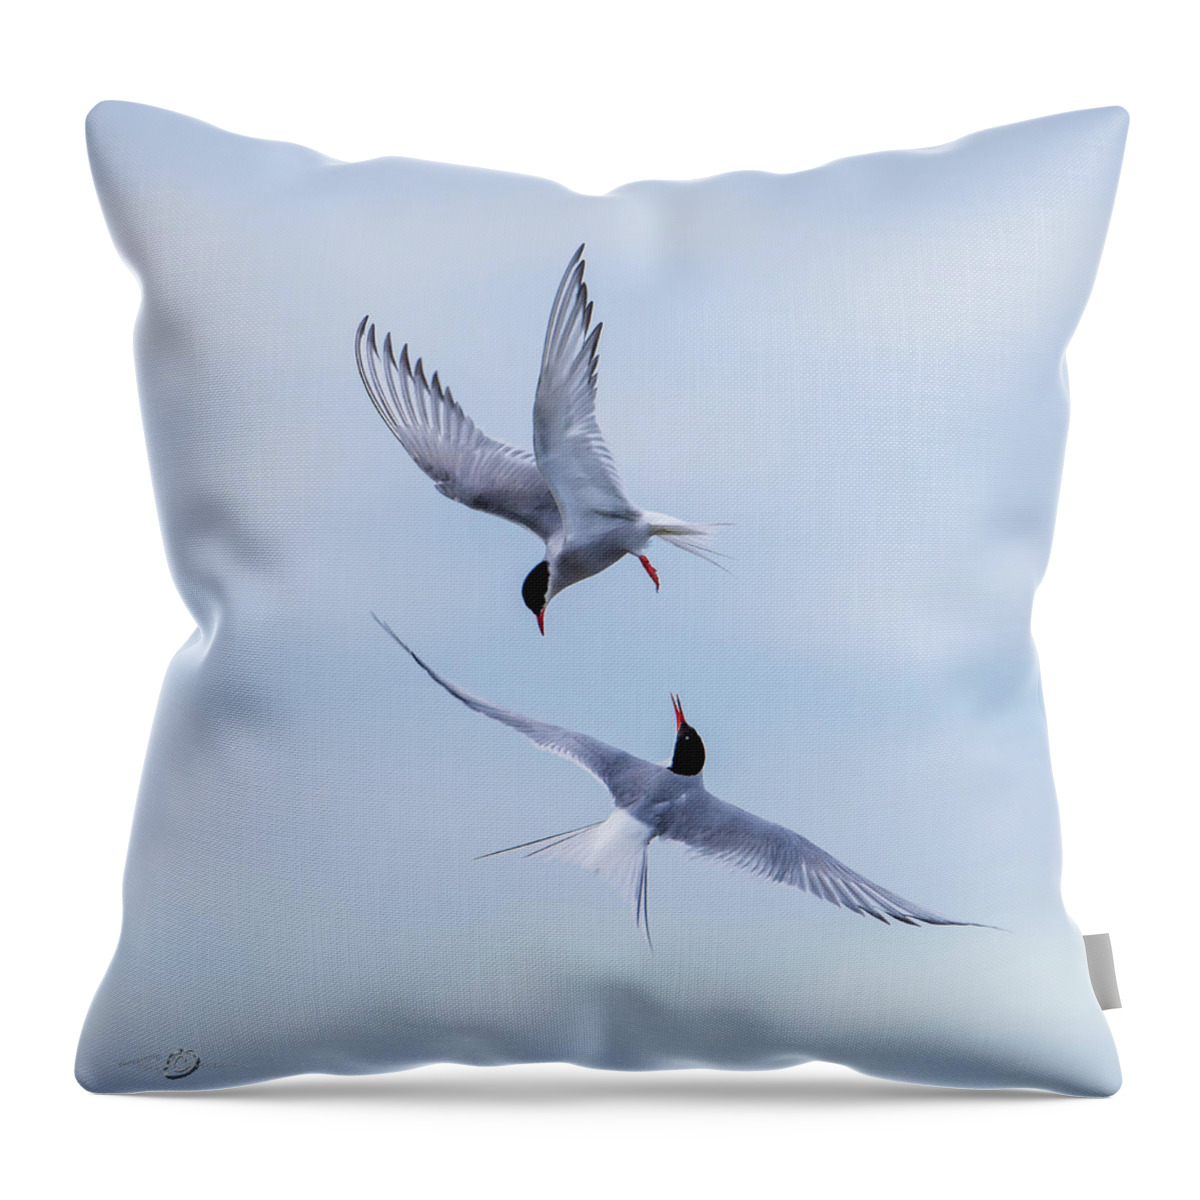 Dancing Arctic Terns Throw Pillow featuring the photograph Dancing Arctic Terns by Torbjorn Swenelius